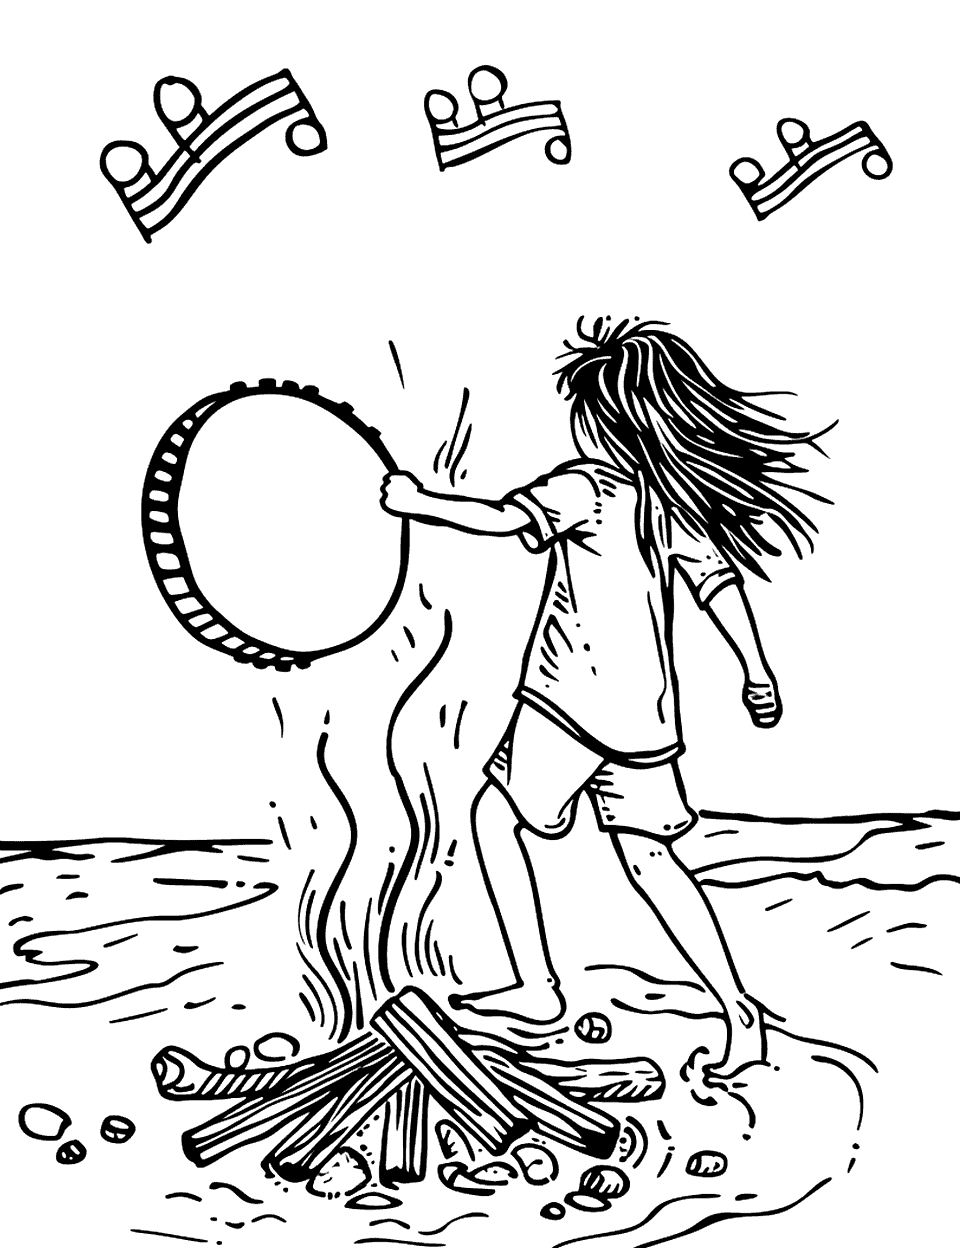 Tambourine Dance on the Beach Music Coloring Page - A child playing a tambourine while dancing around a beach bonfire.